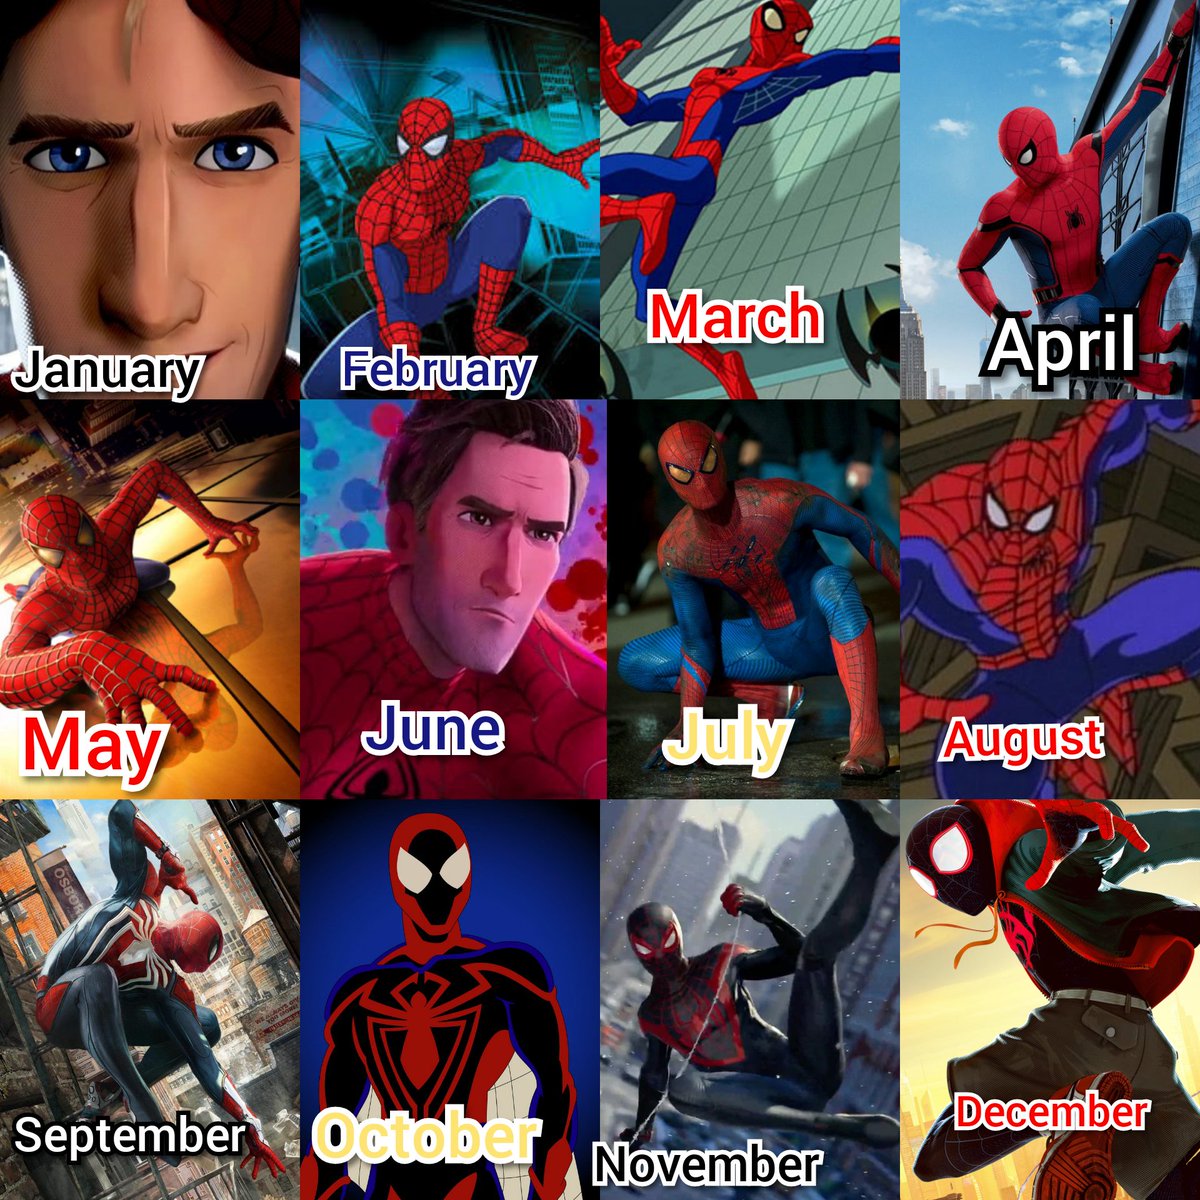 Jp On Twitter I Made My Own Spider Man Birth Month Pic Whatever Your Birth Month Is That S The Spidey You Get And If It S One You Don T Like Idk What To